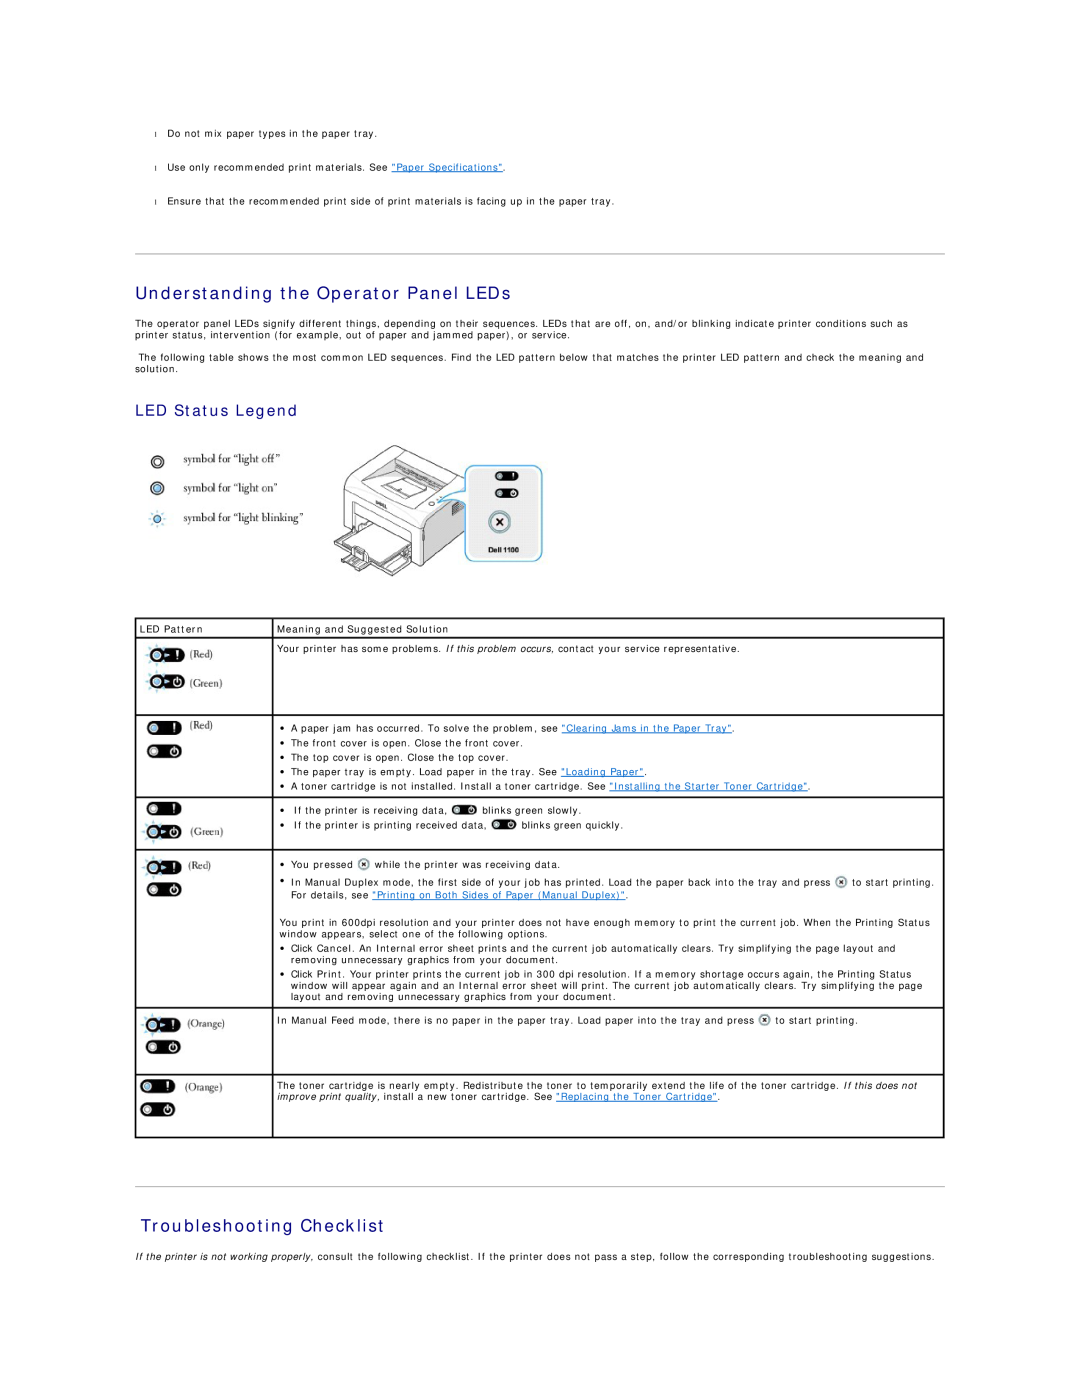 Dell 1100 specifications Understanding the Operator Panel LEDs, Troubleshooting Checklist, LED Status Legend, LED Pattern 